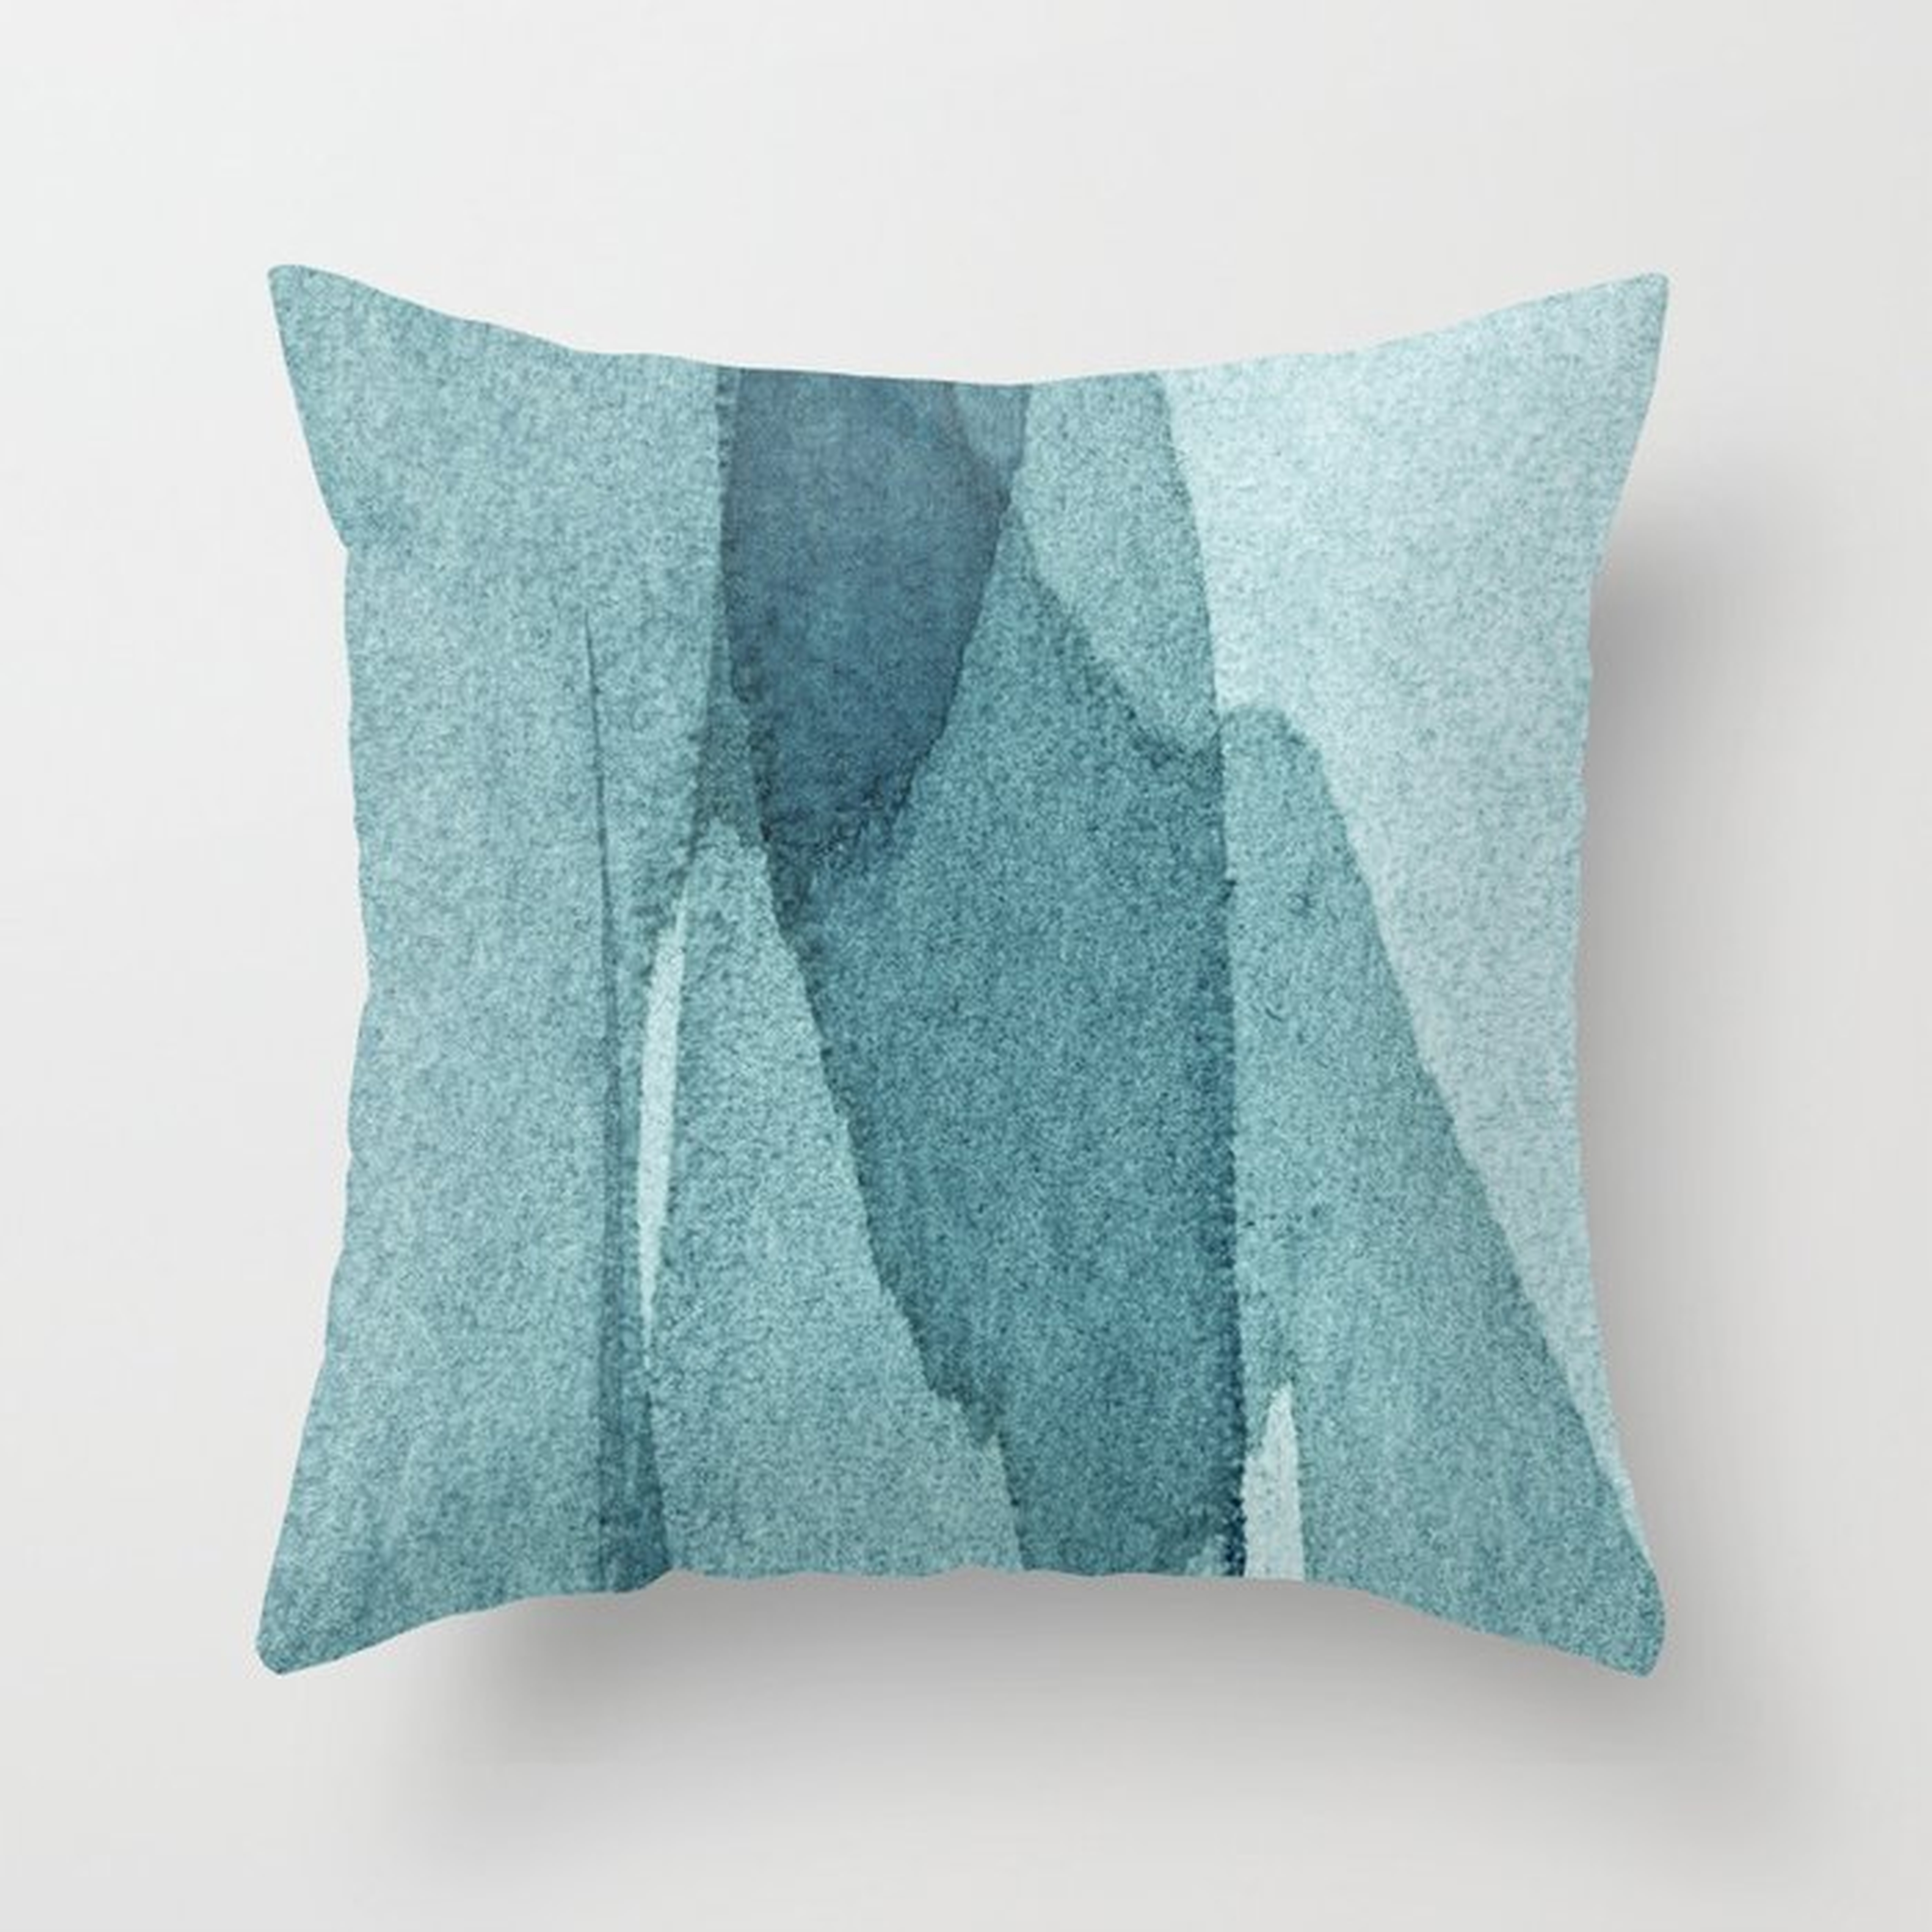 Transparent 4-4 Throw Pillow by Iris Lehnhardt - Cover (18" x 18") With Pillow Insert - Outdoor Pillow - Society6